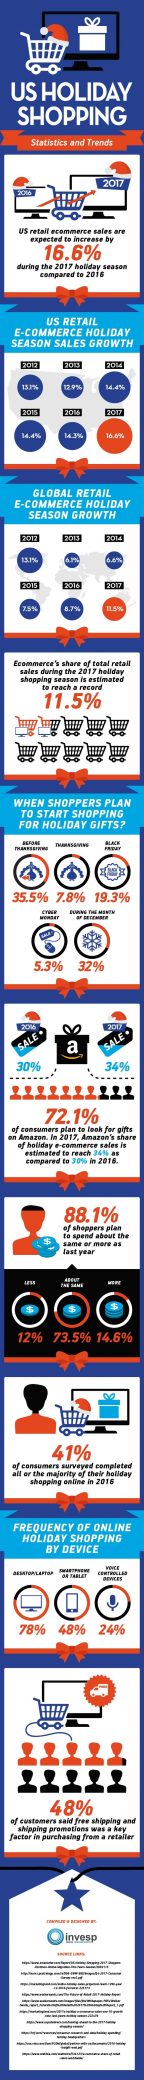 2017 Retail E-commerce Sales Statistics During the Holiday Season: What You Need to Do [Infographic]